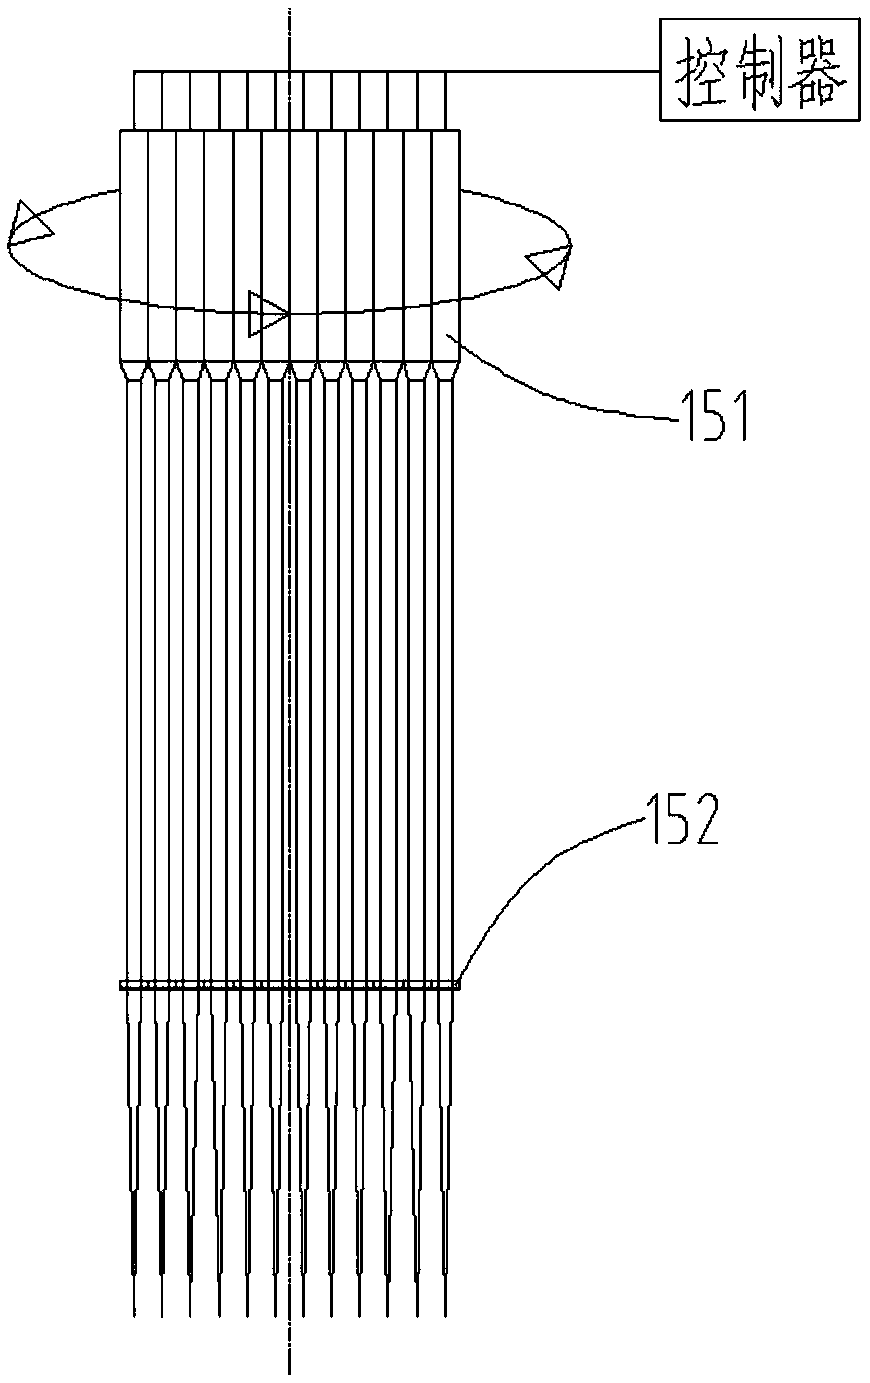 A device and method for drilling a hole using a laser beam